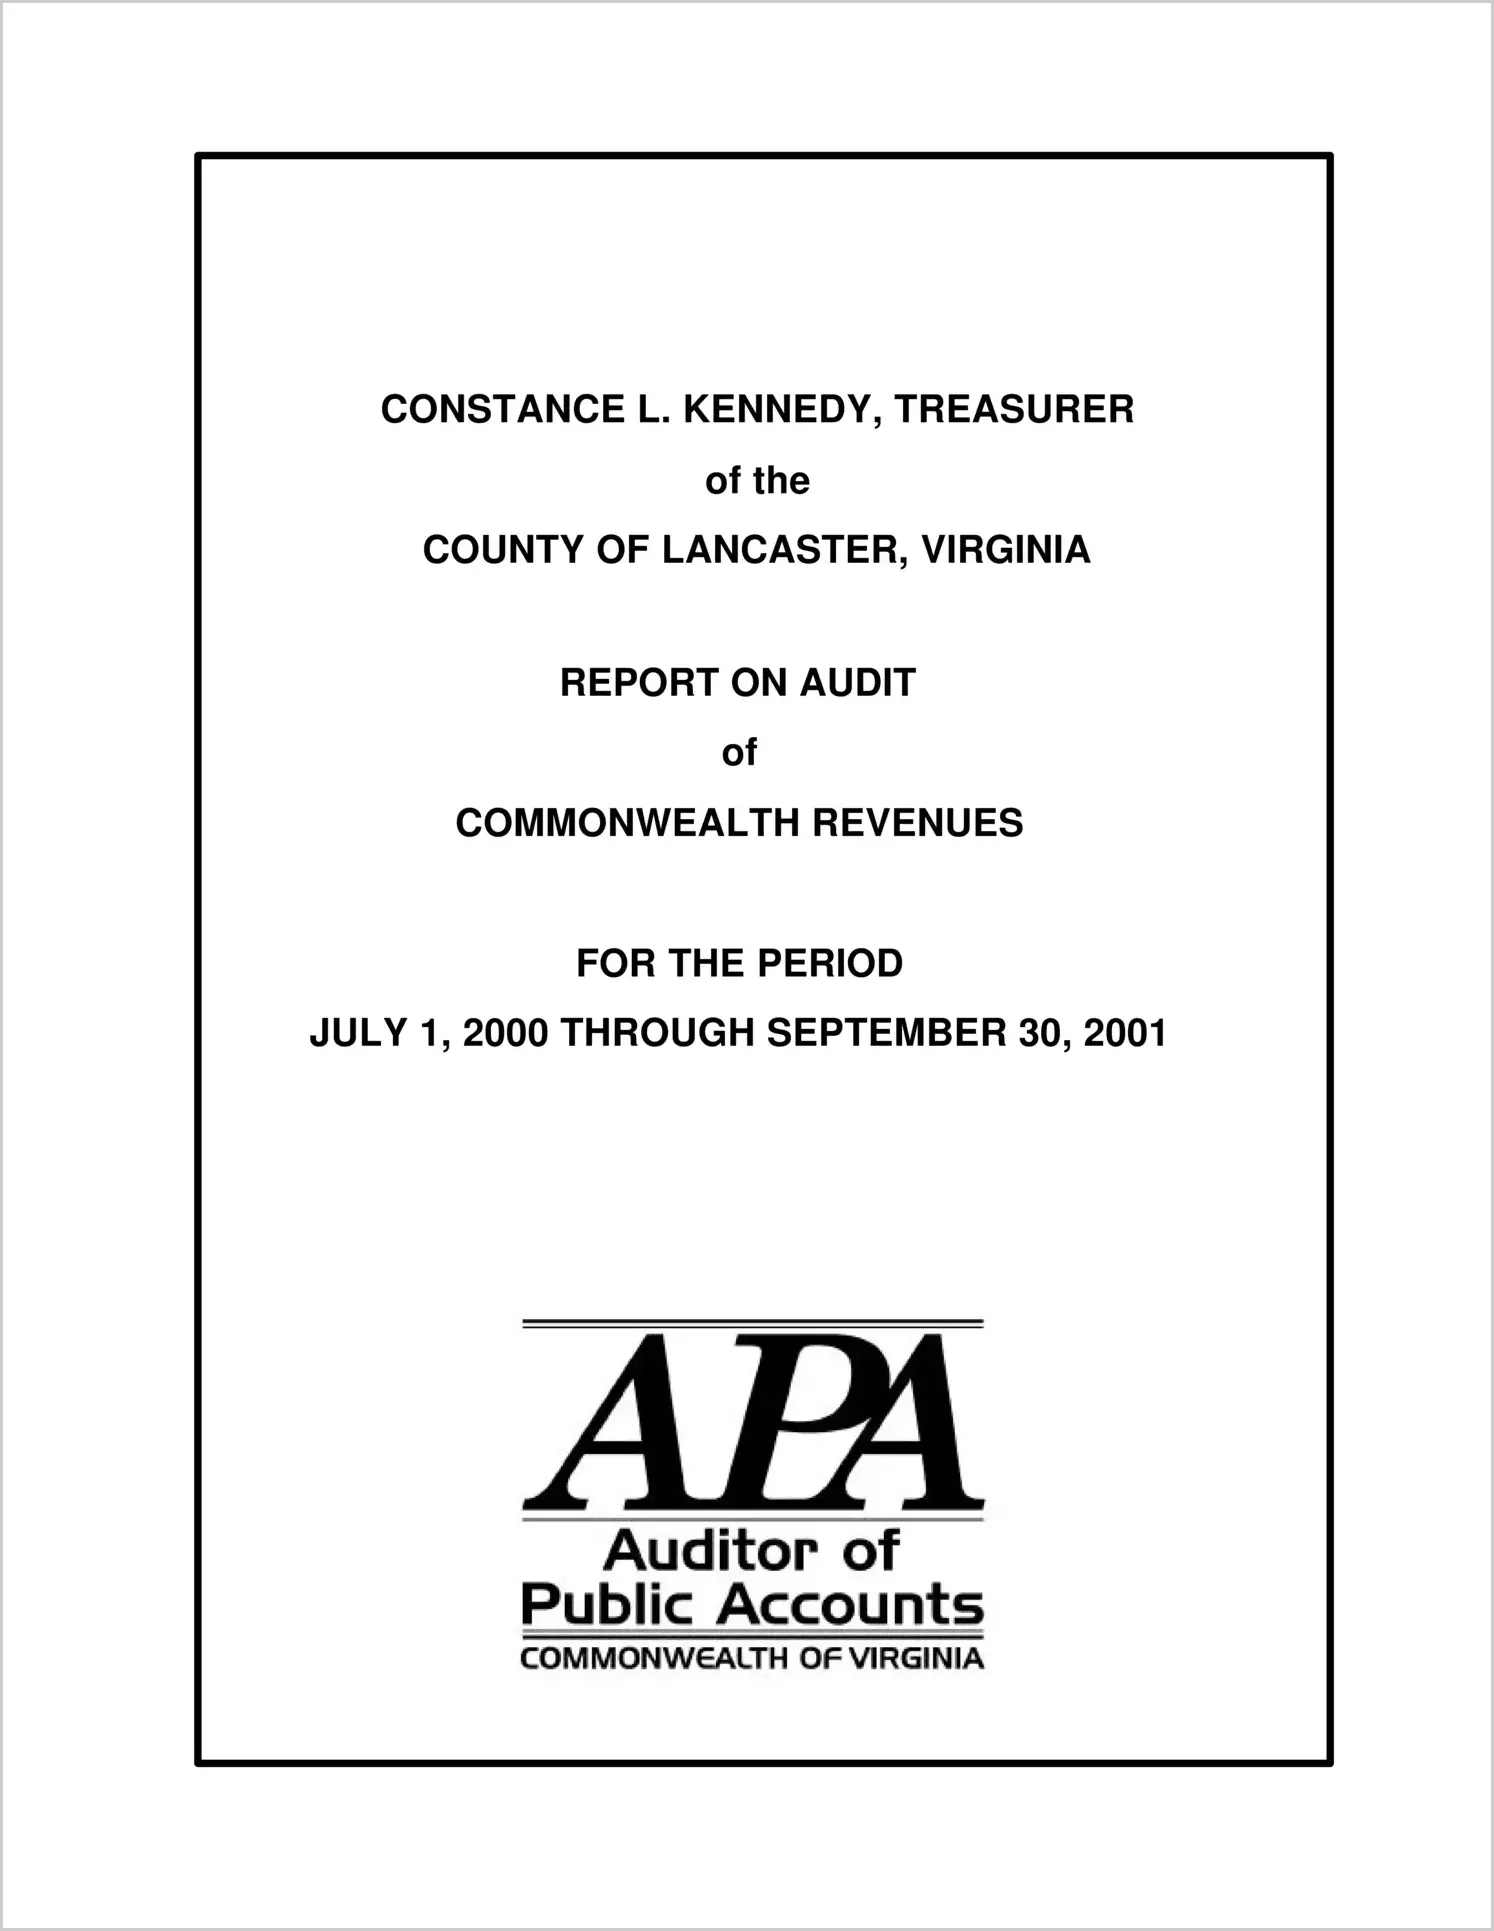 Clerk of the Circuit Court of the County of Lancaster Report on Audit of Commonwealth Revenues for the period July 1, 2000 through September 30, 2001